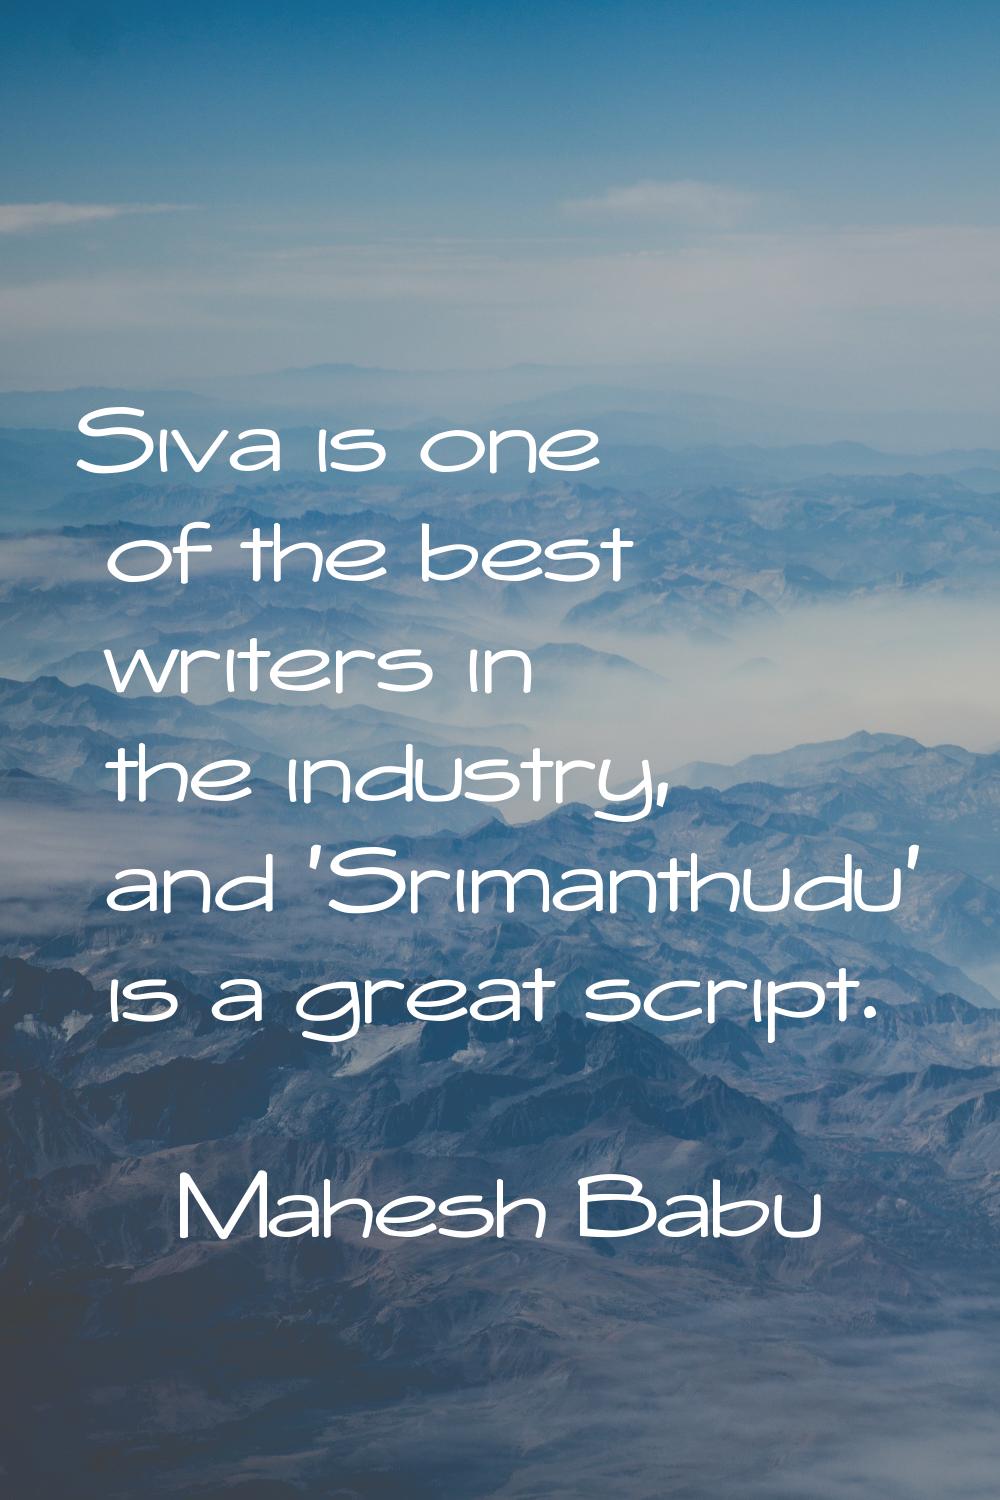 Siva is one of the best writers in the industry, and 'Srimanthudu' is a great script.